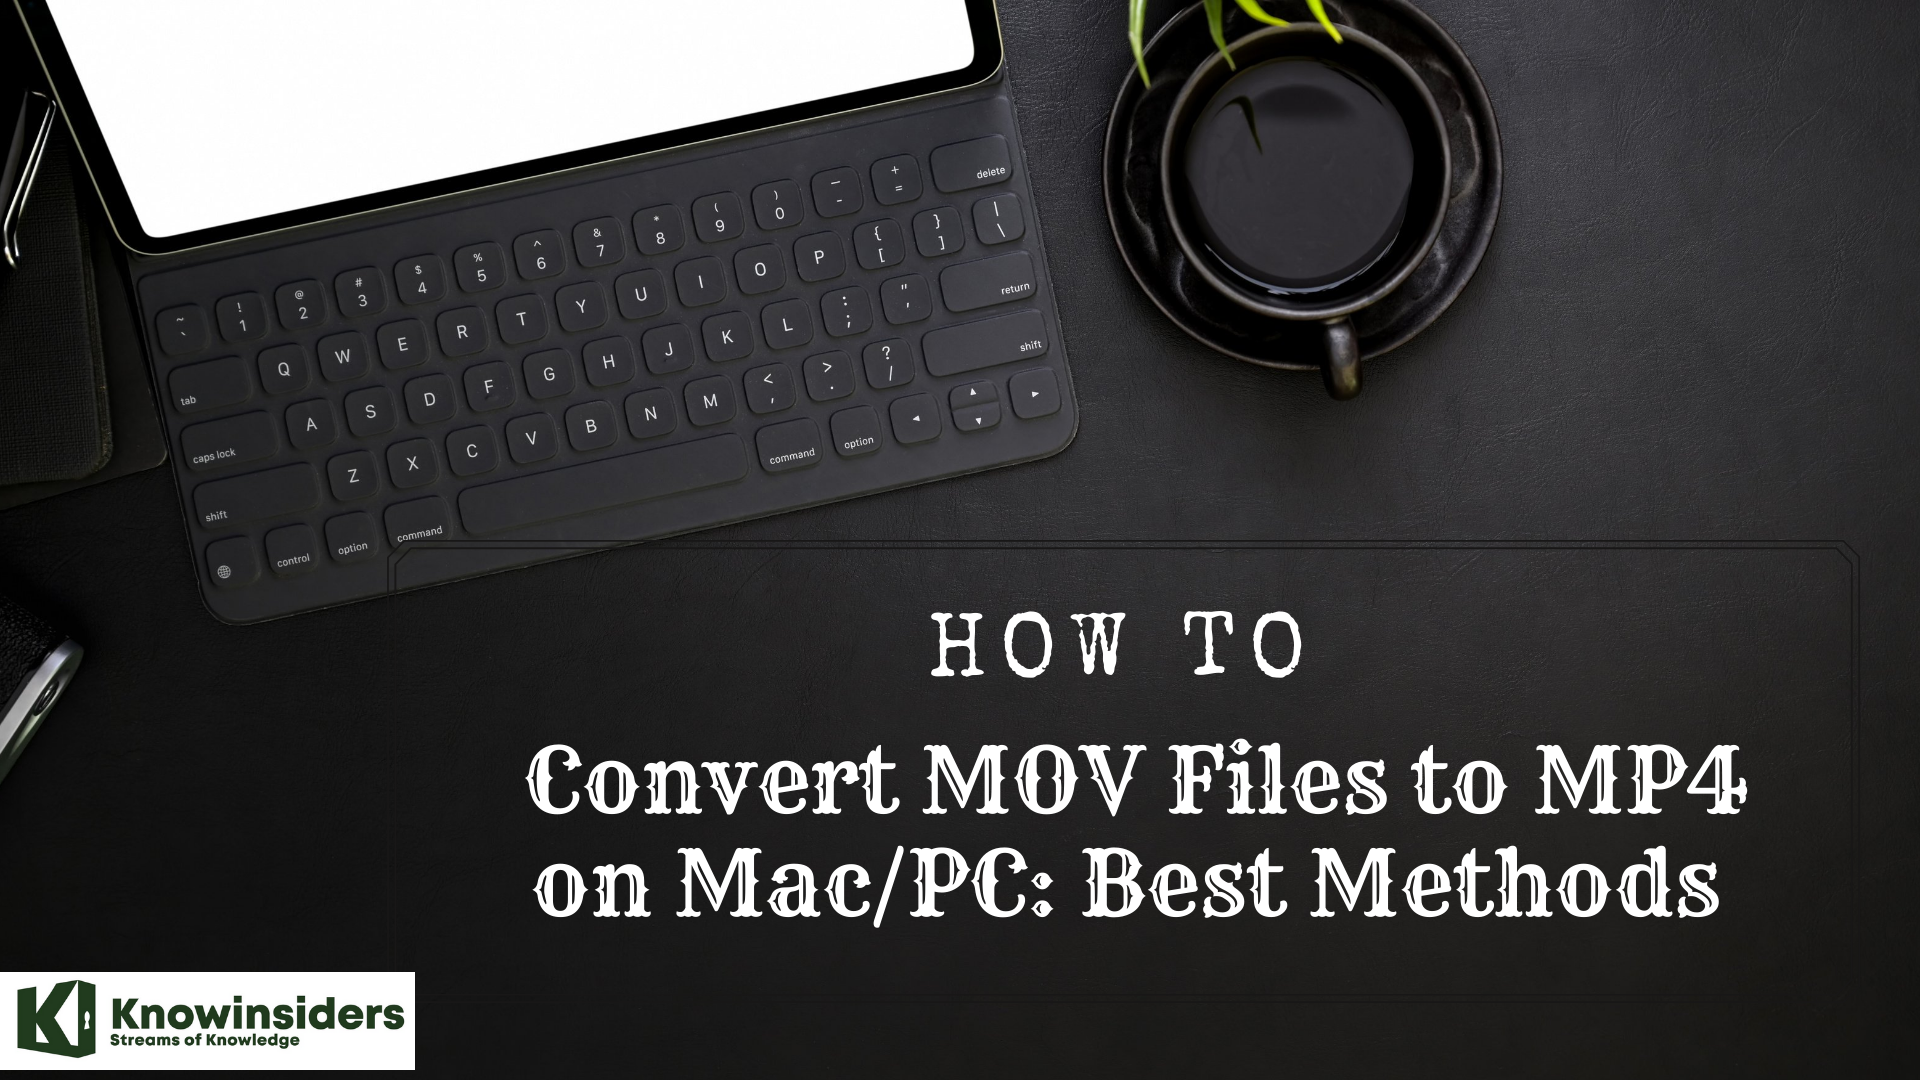 How to Convert MOV Files to MP4 on Mac/PC